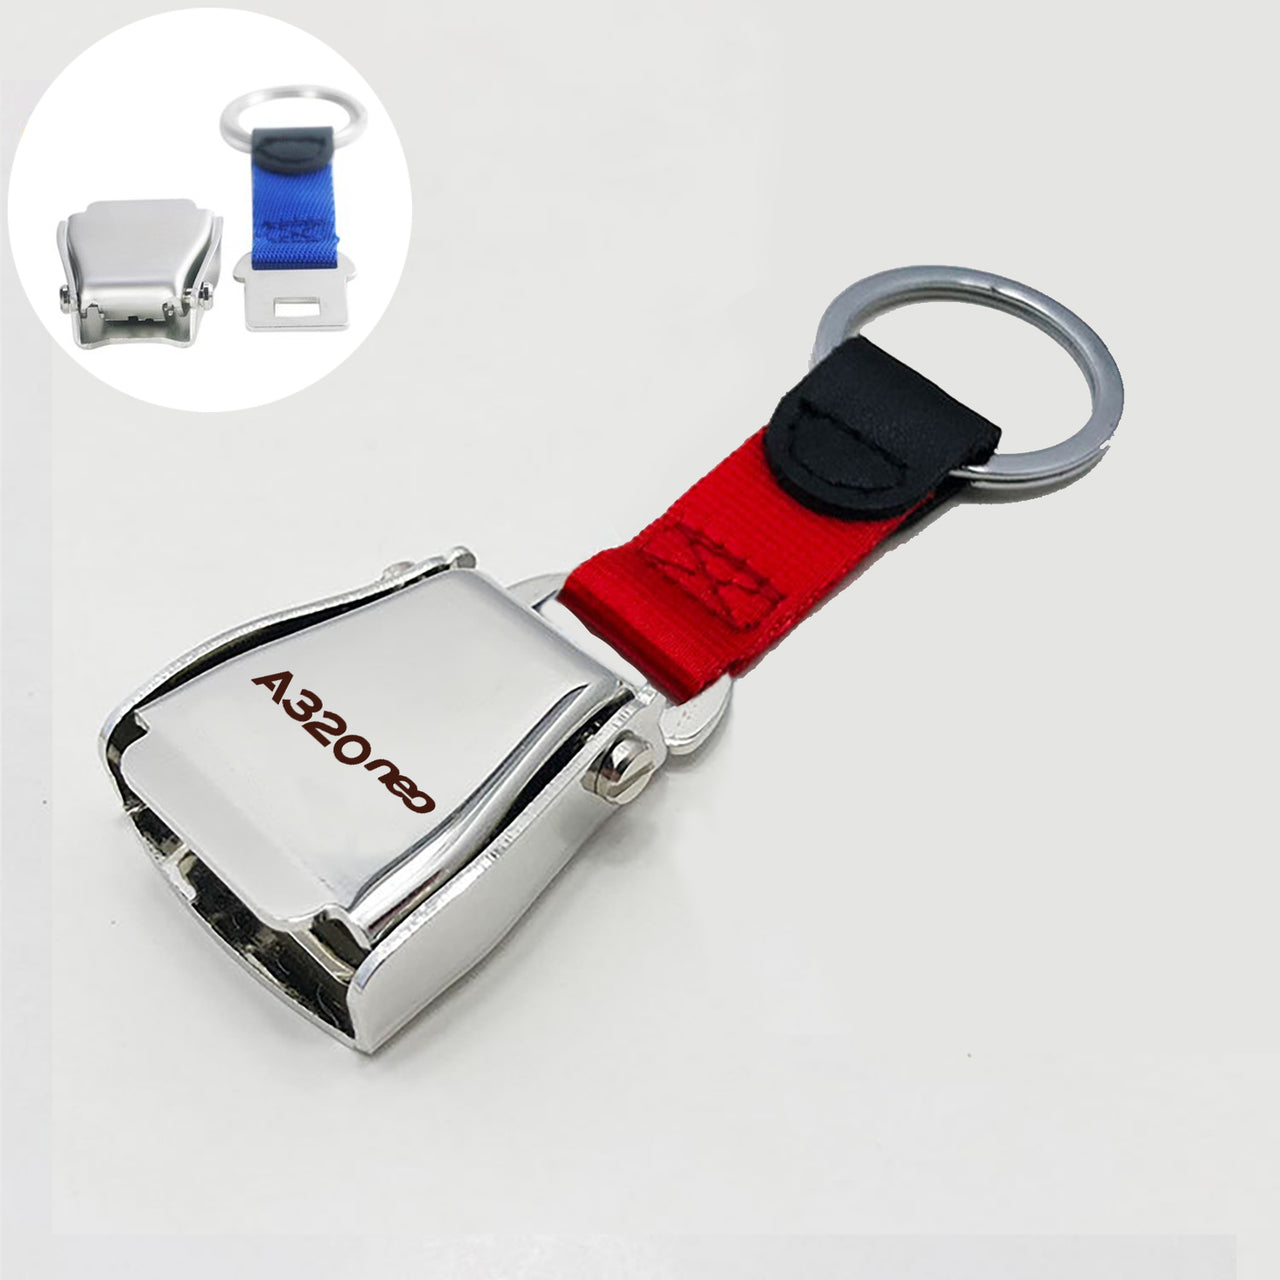 A320neo & Text Designed Airplane Seat Belt Key Chains